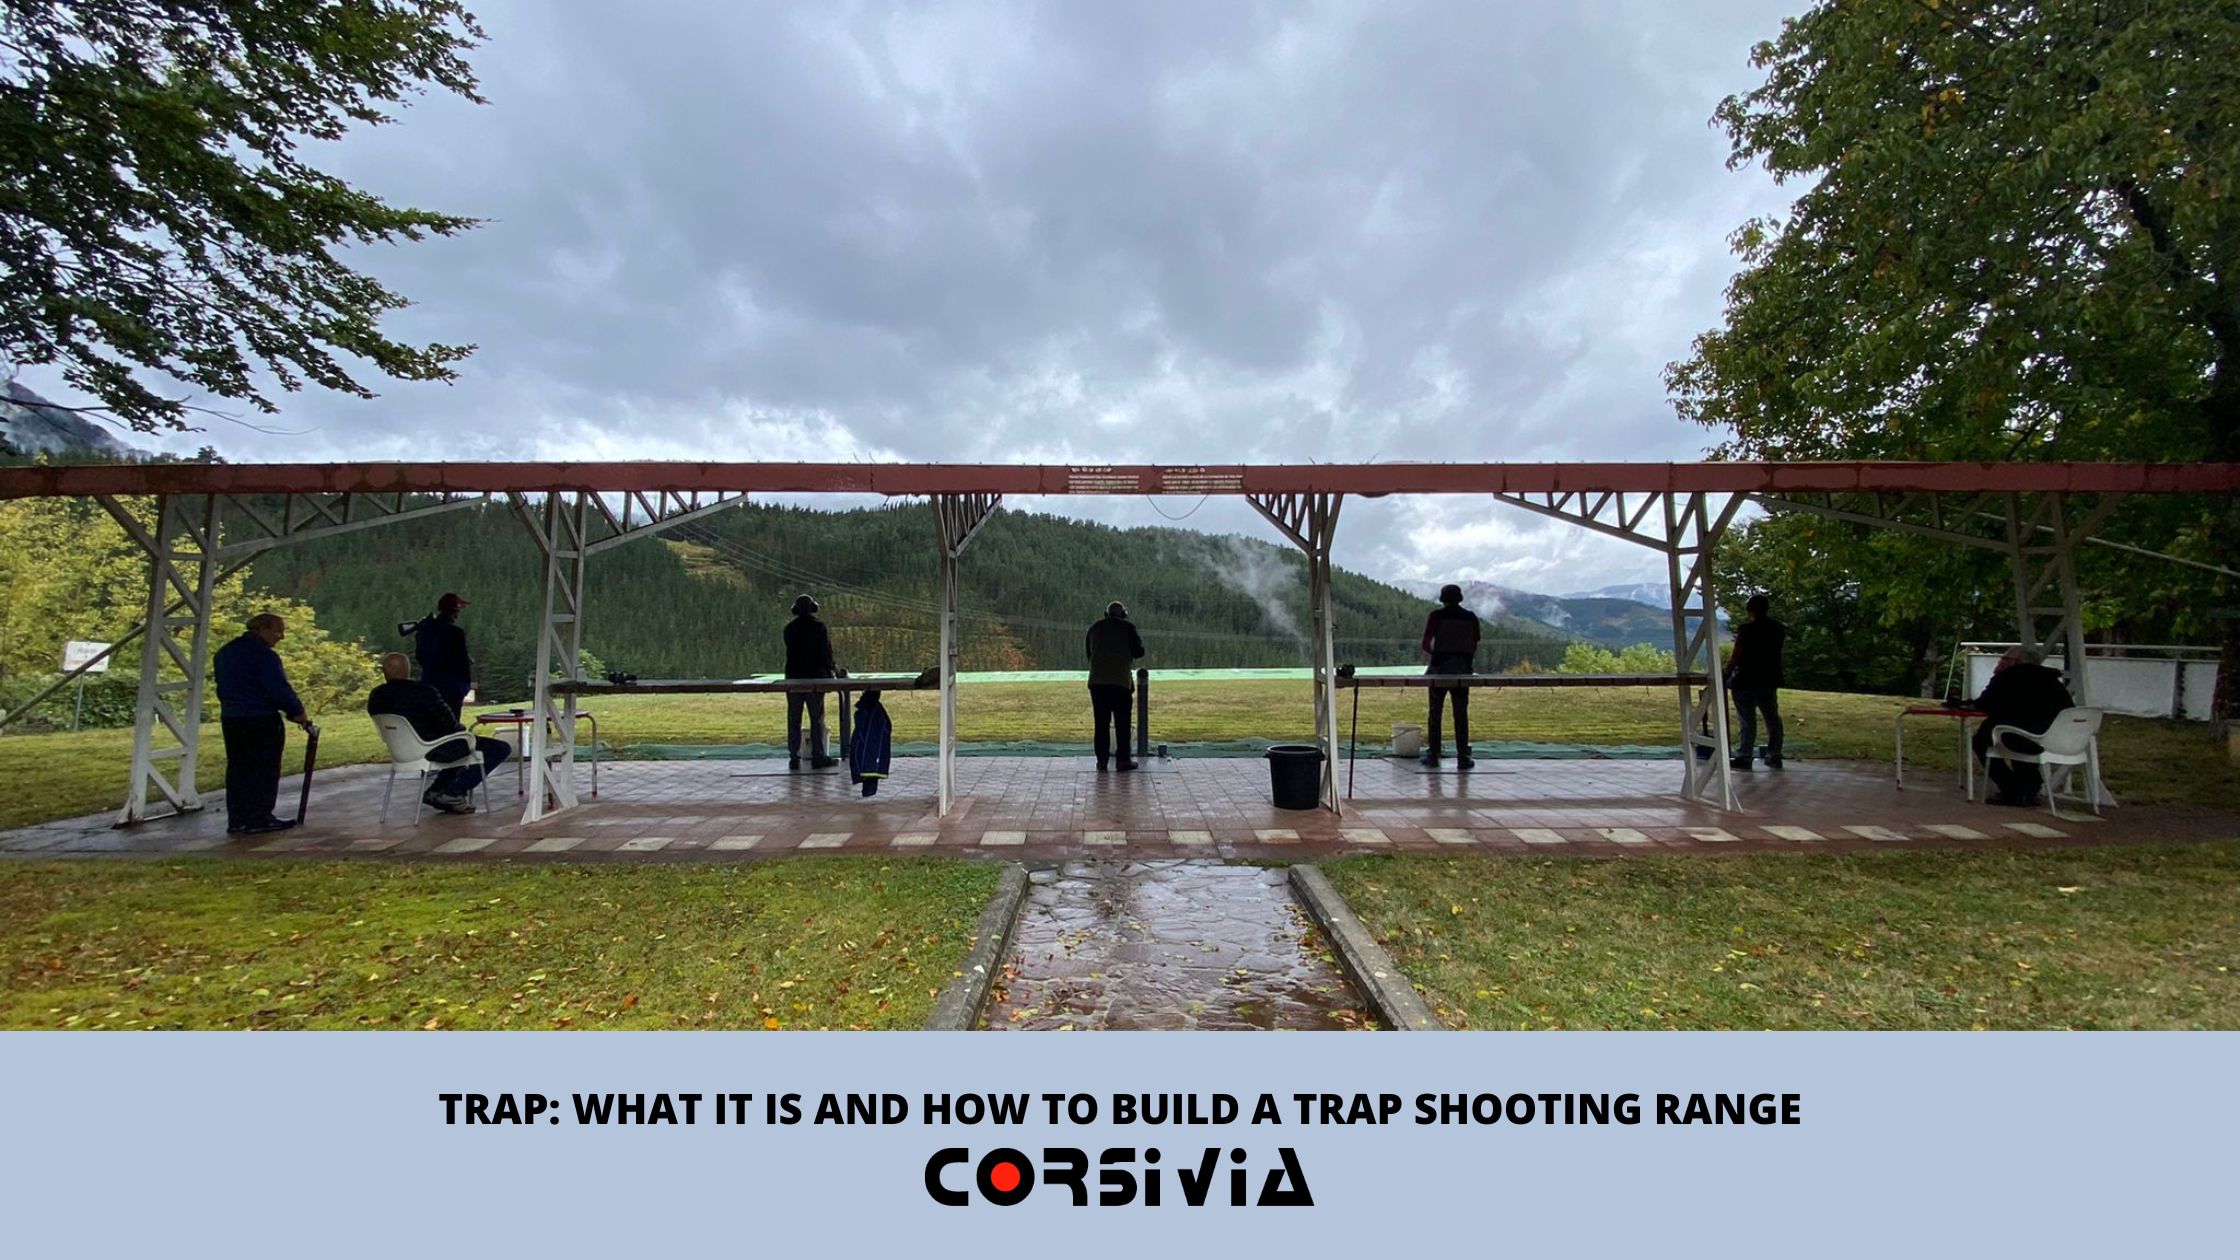 TRAP: WHAT IT IS AND HOW TO BUILD A TRAP SHOOTING RANGE